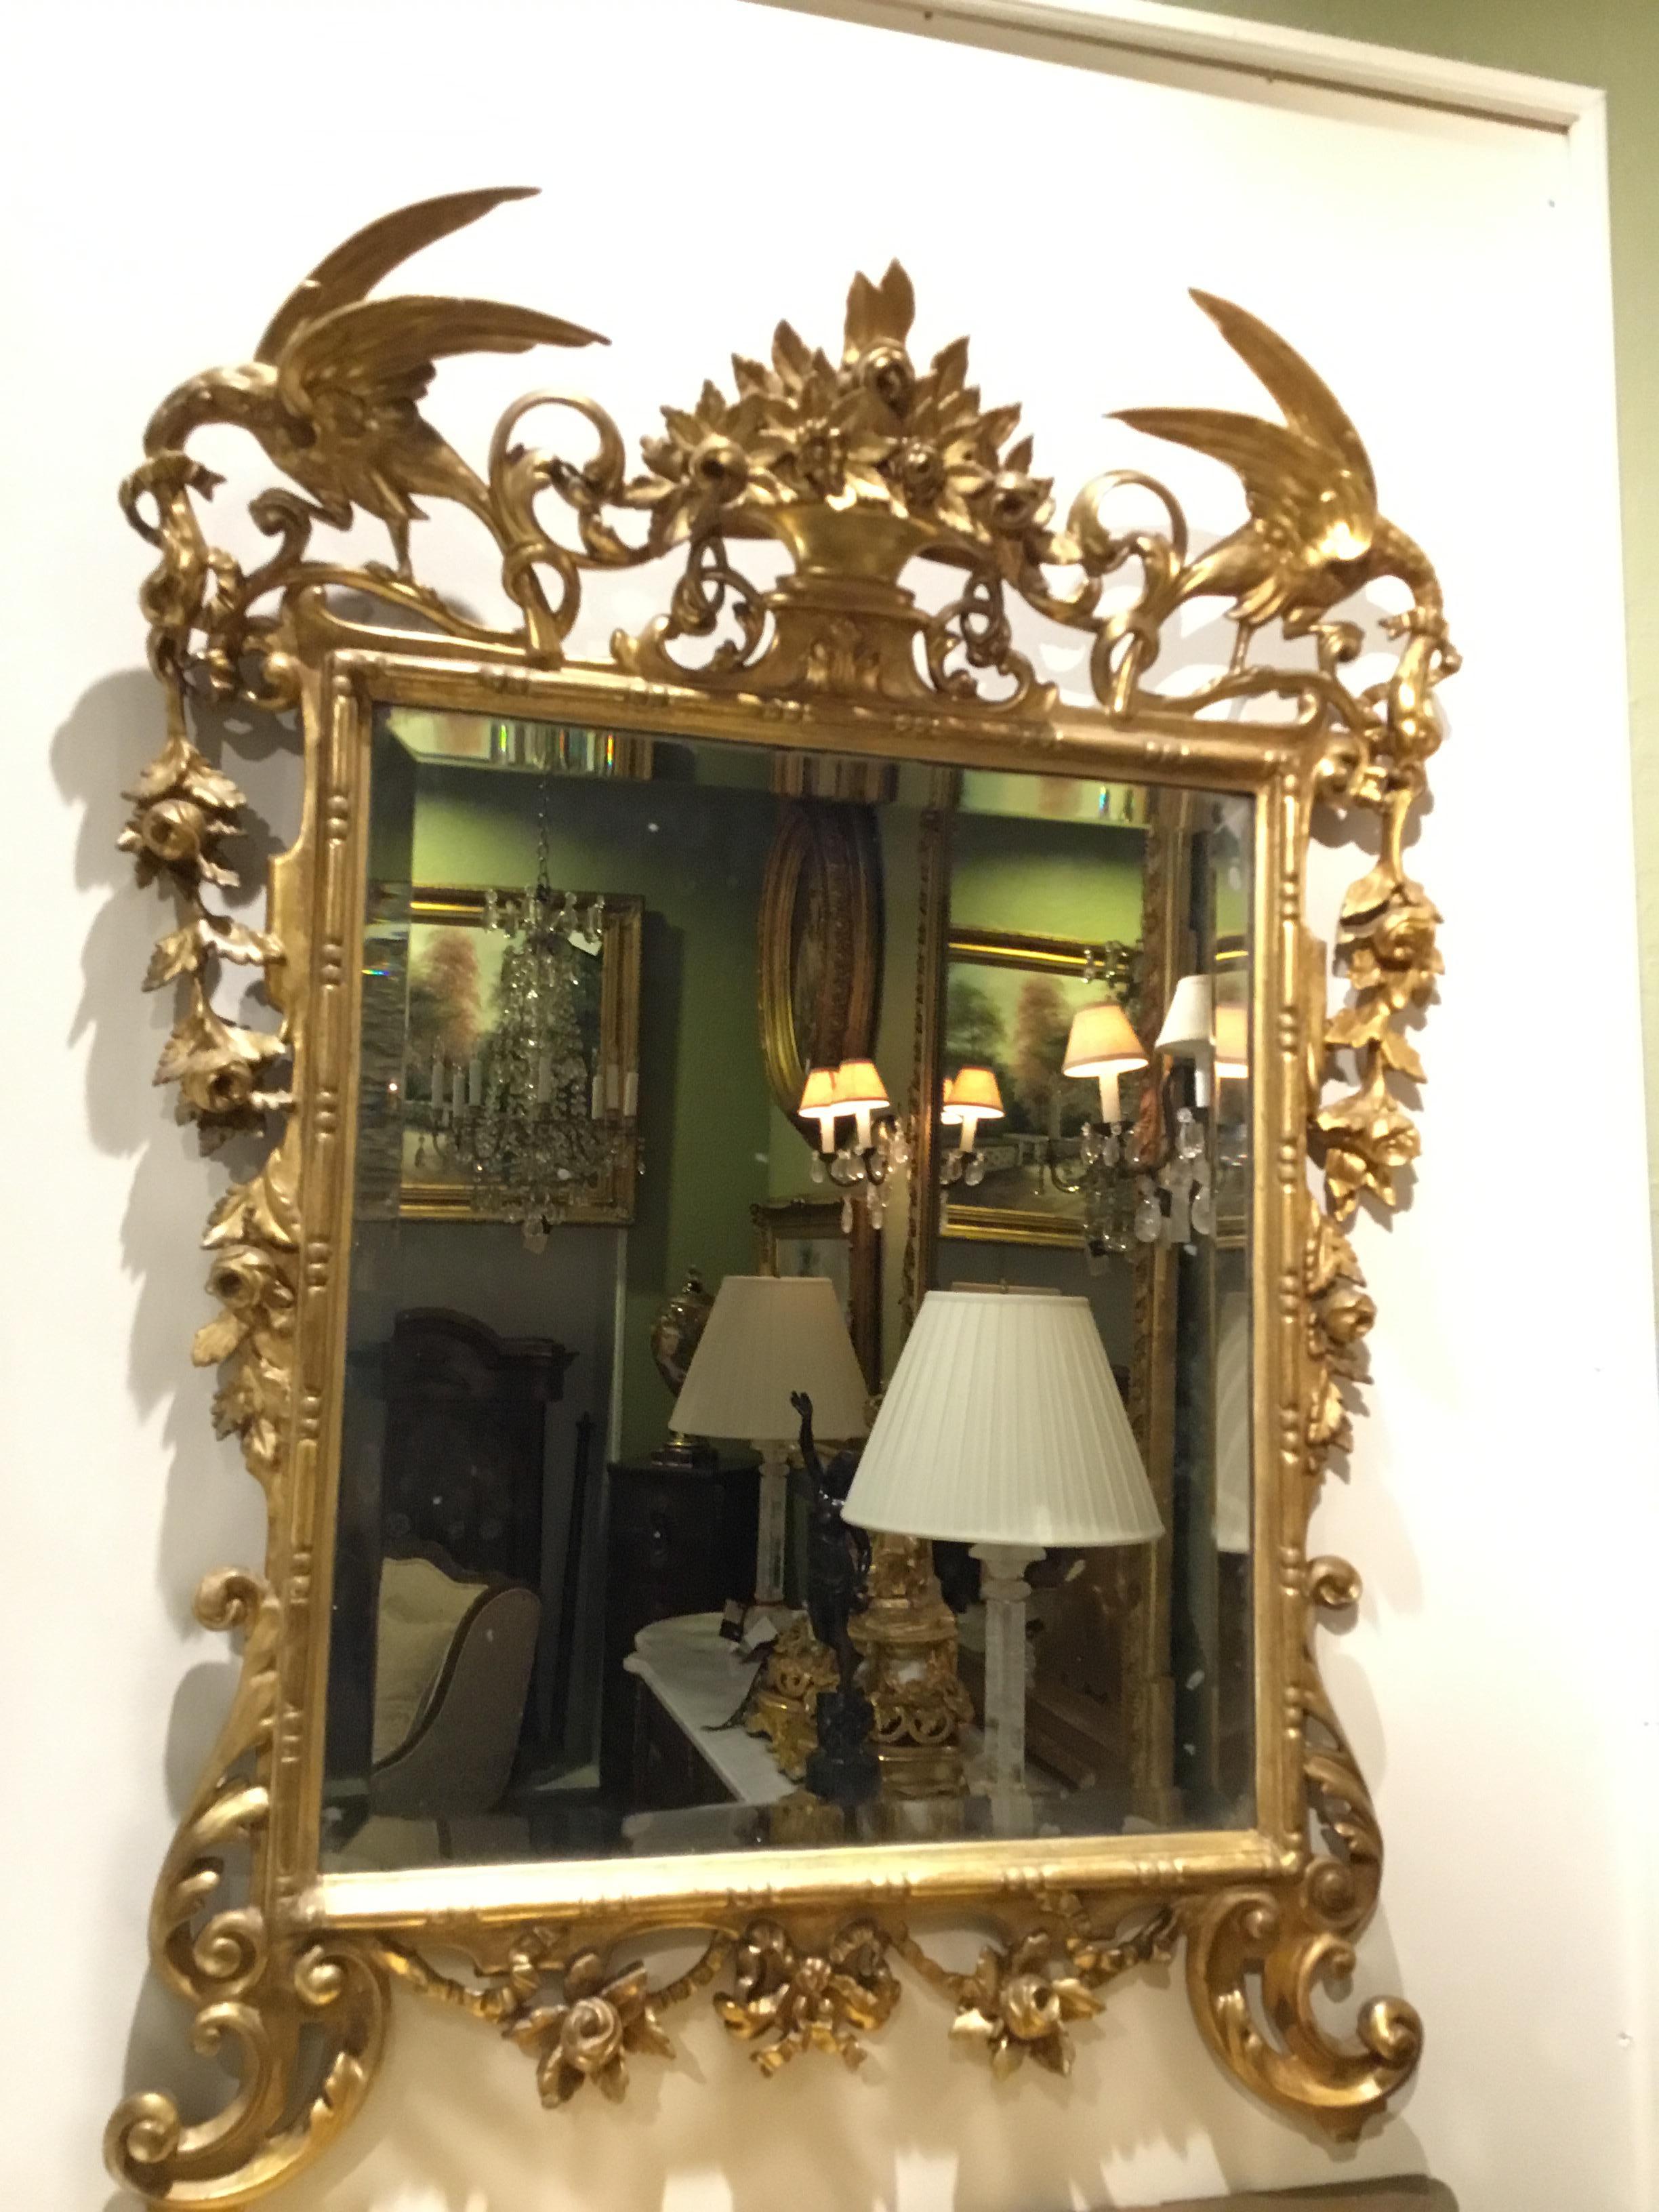 Mid-19th Century Giltwood Carved 19th Century Beveled Plate Mirror with Birds and Foliate Designs